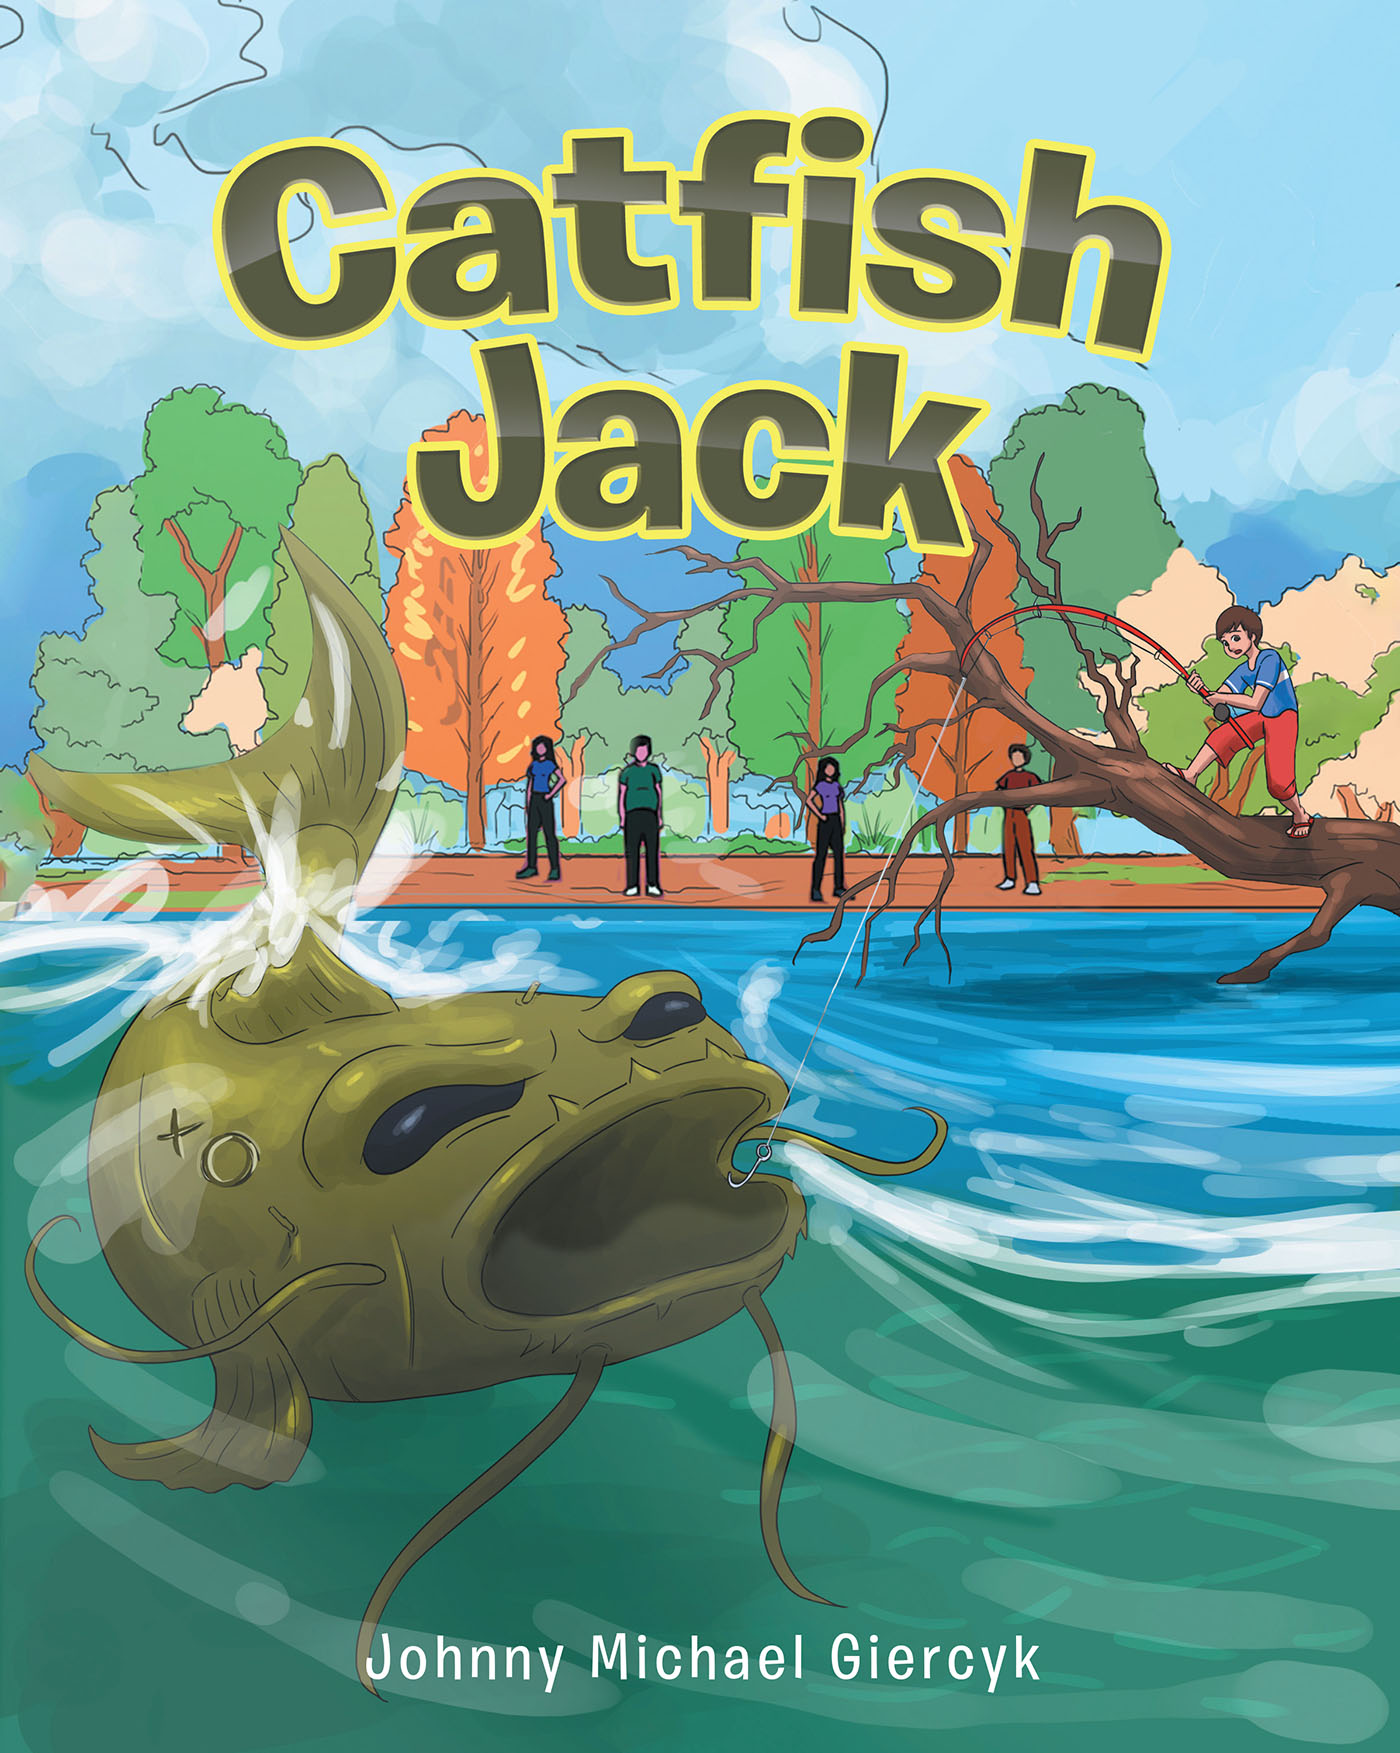 Johnny Michael Giercyk's New Book Catfish Jack is a Wonderful Children's  Story That Celebrates Youth, Wonder, Tall Tales, and the First Day of  Fishing Season.